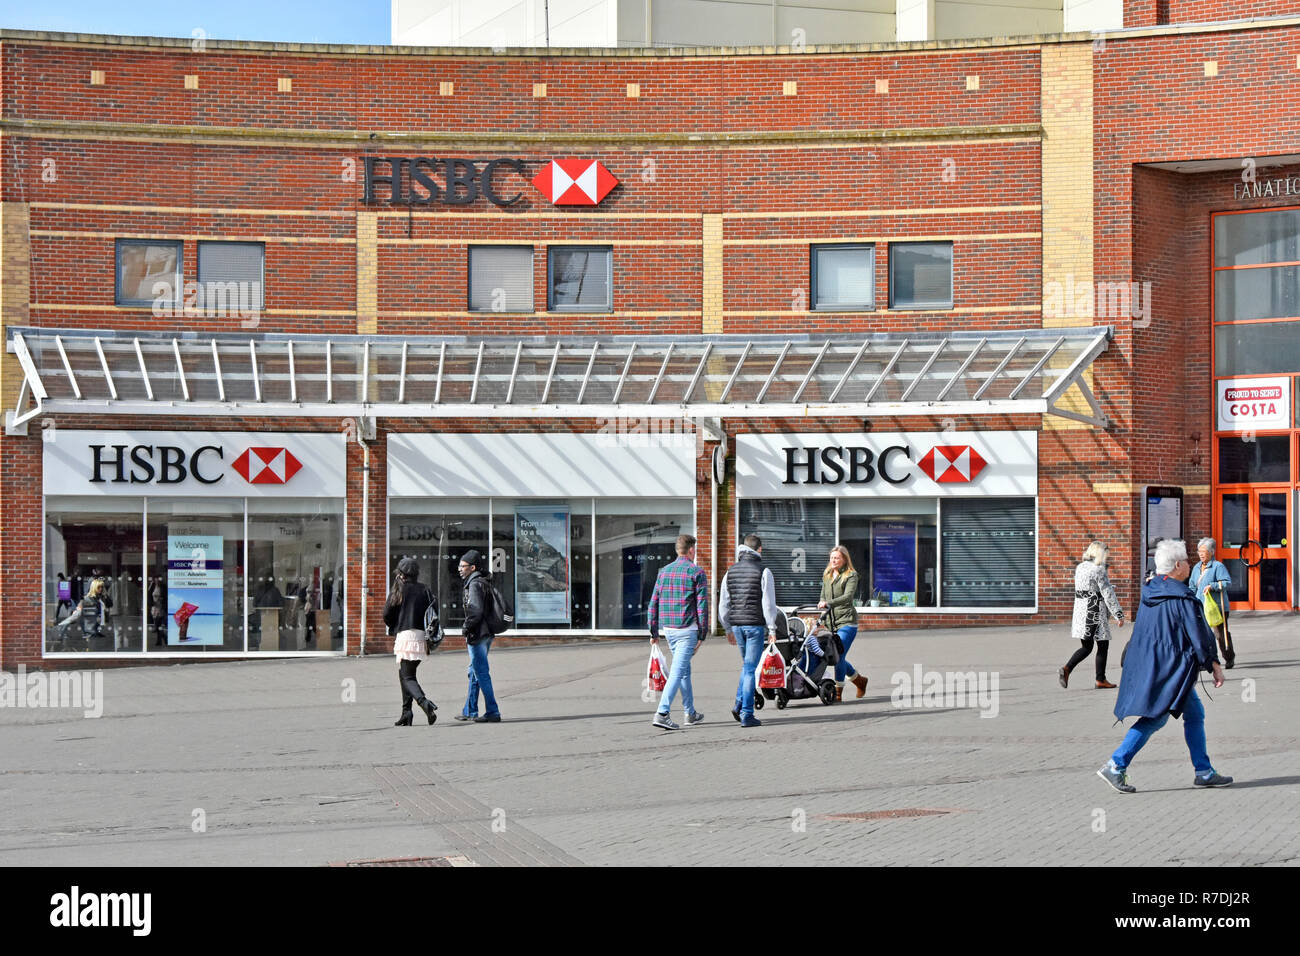 Exterior of HSBC bank branch providing banking facility premises in busy seaside resort shopping high street in Southend on Sea England Essex UK Stock Photo